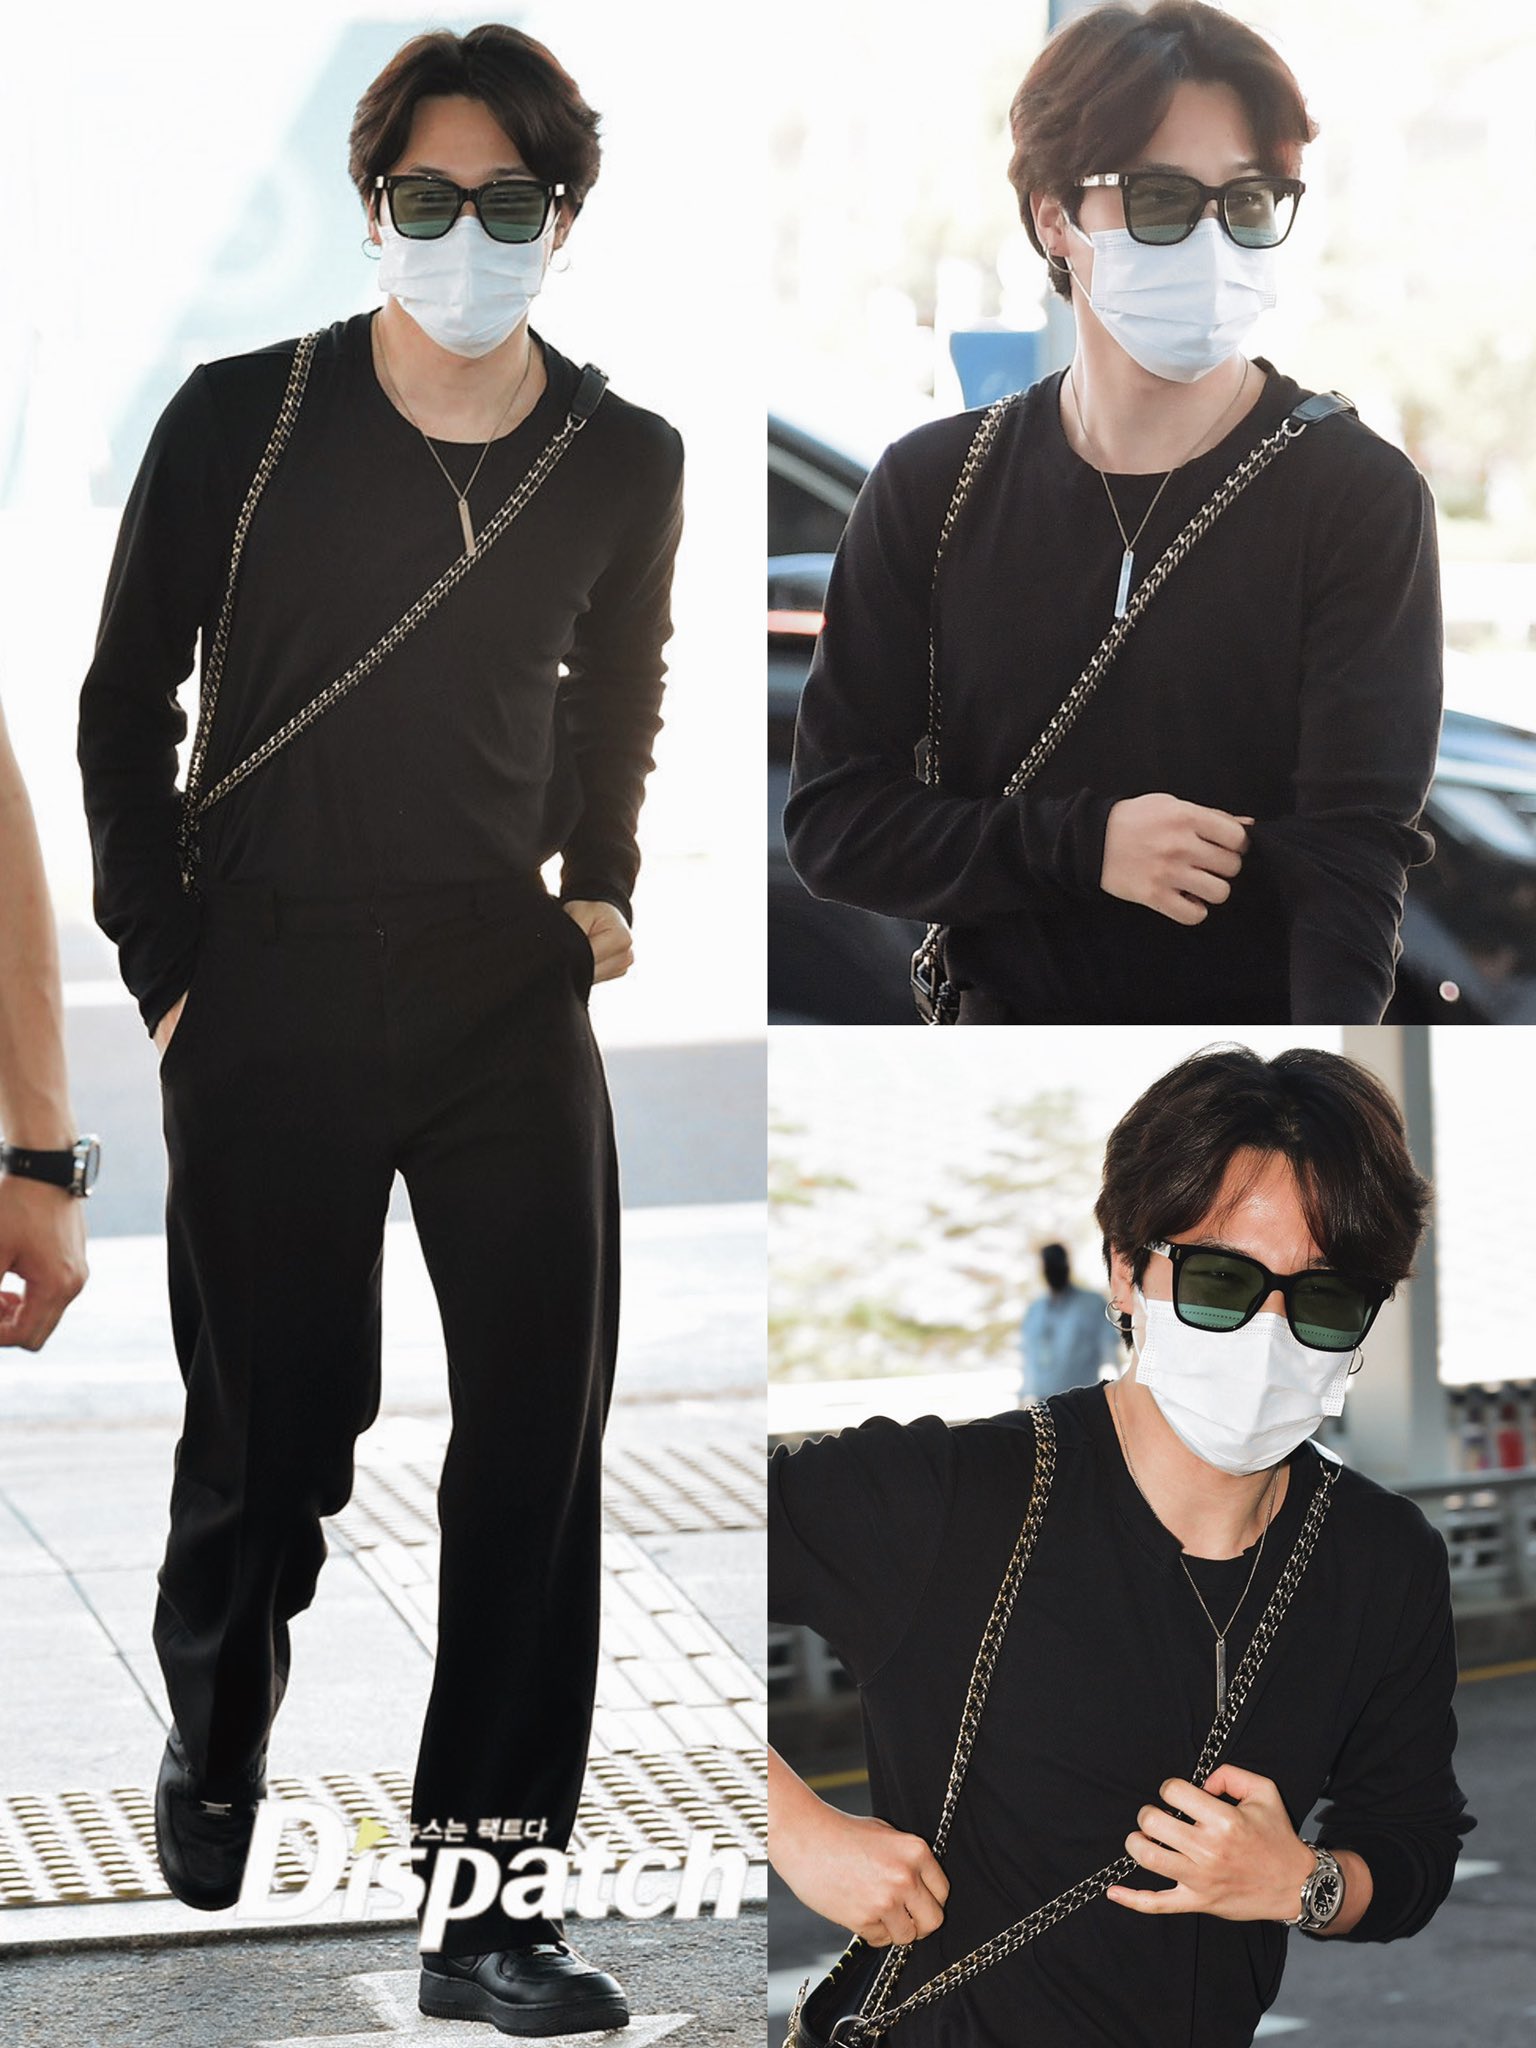 Clout News on X: JIMIN looks amazing in new pictures from the Incheon  Airport today 📸🤍 He is leaving for Chicago, USA to attend the  Lollapalooza Festival held at Grant Park in